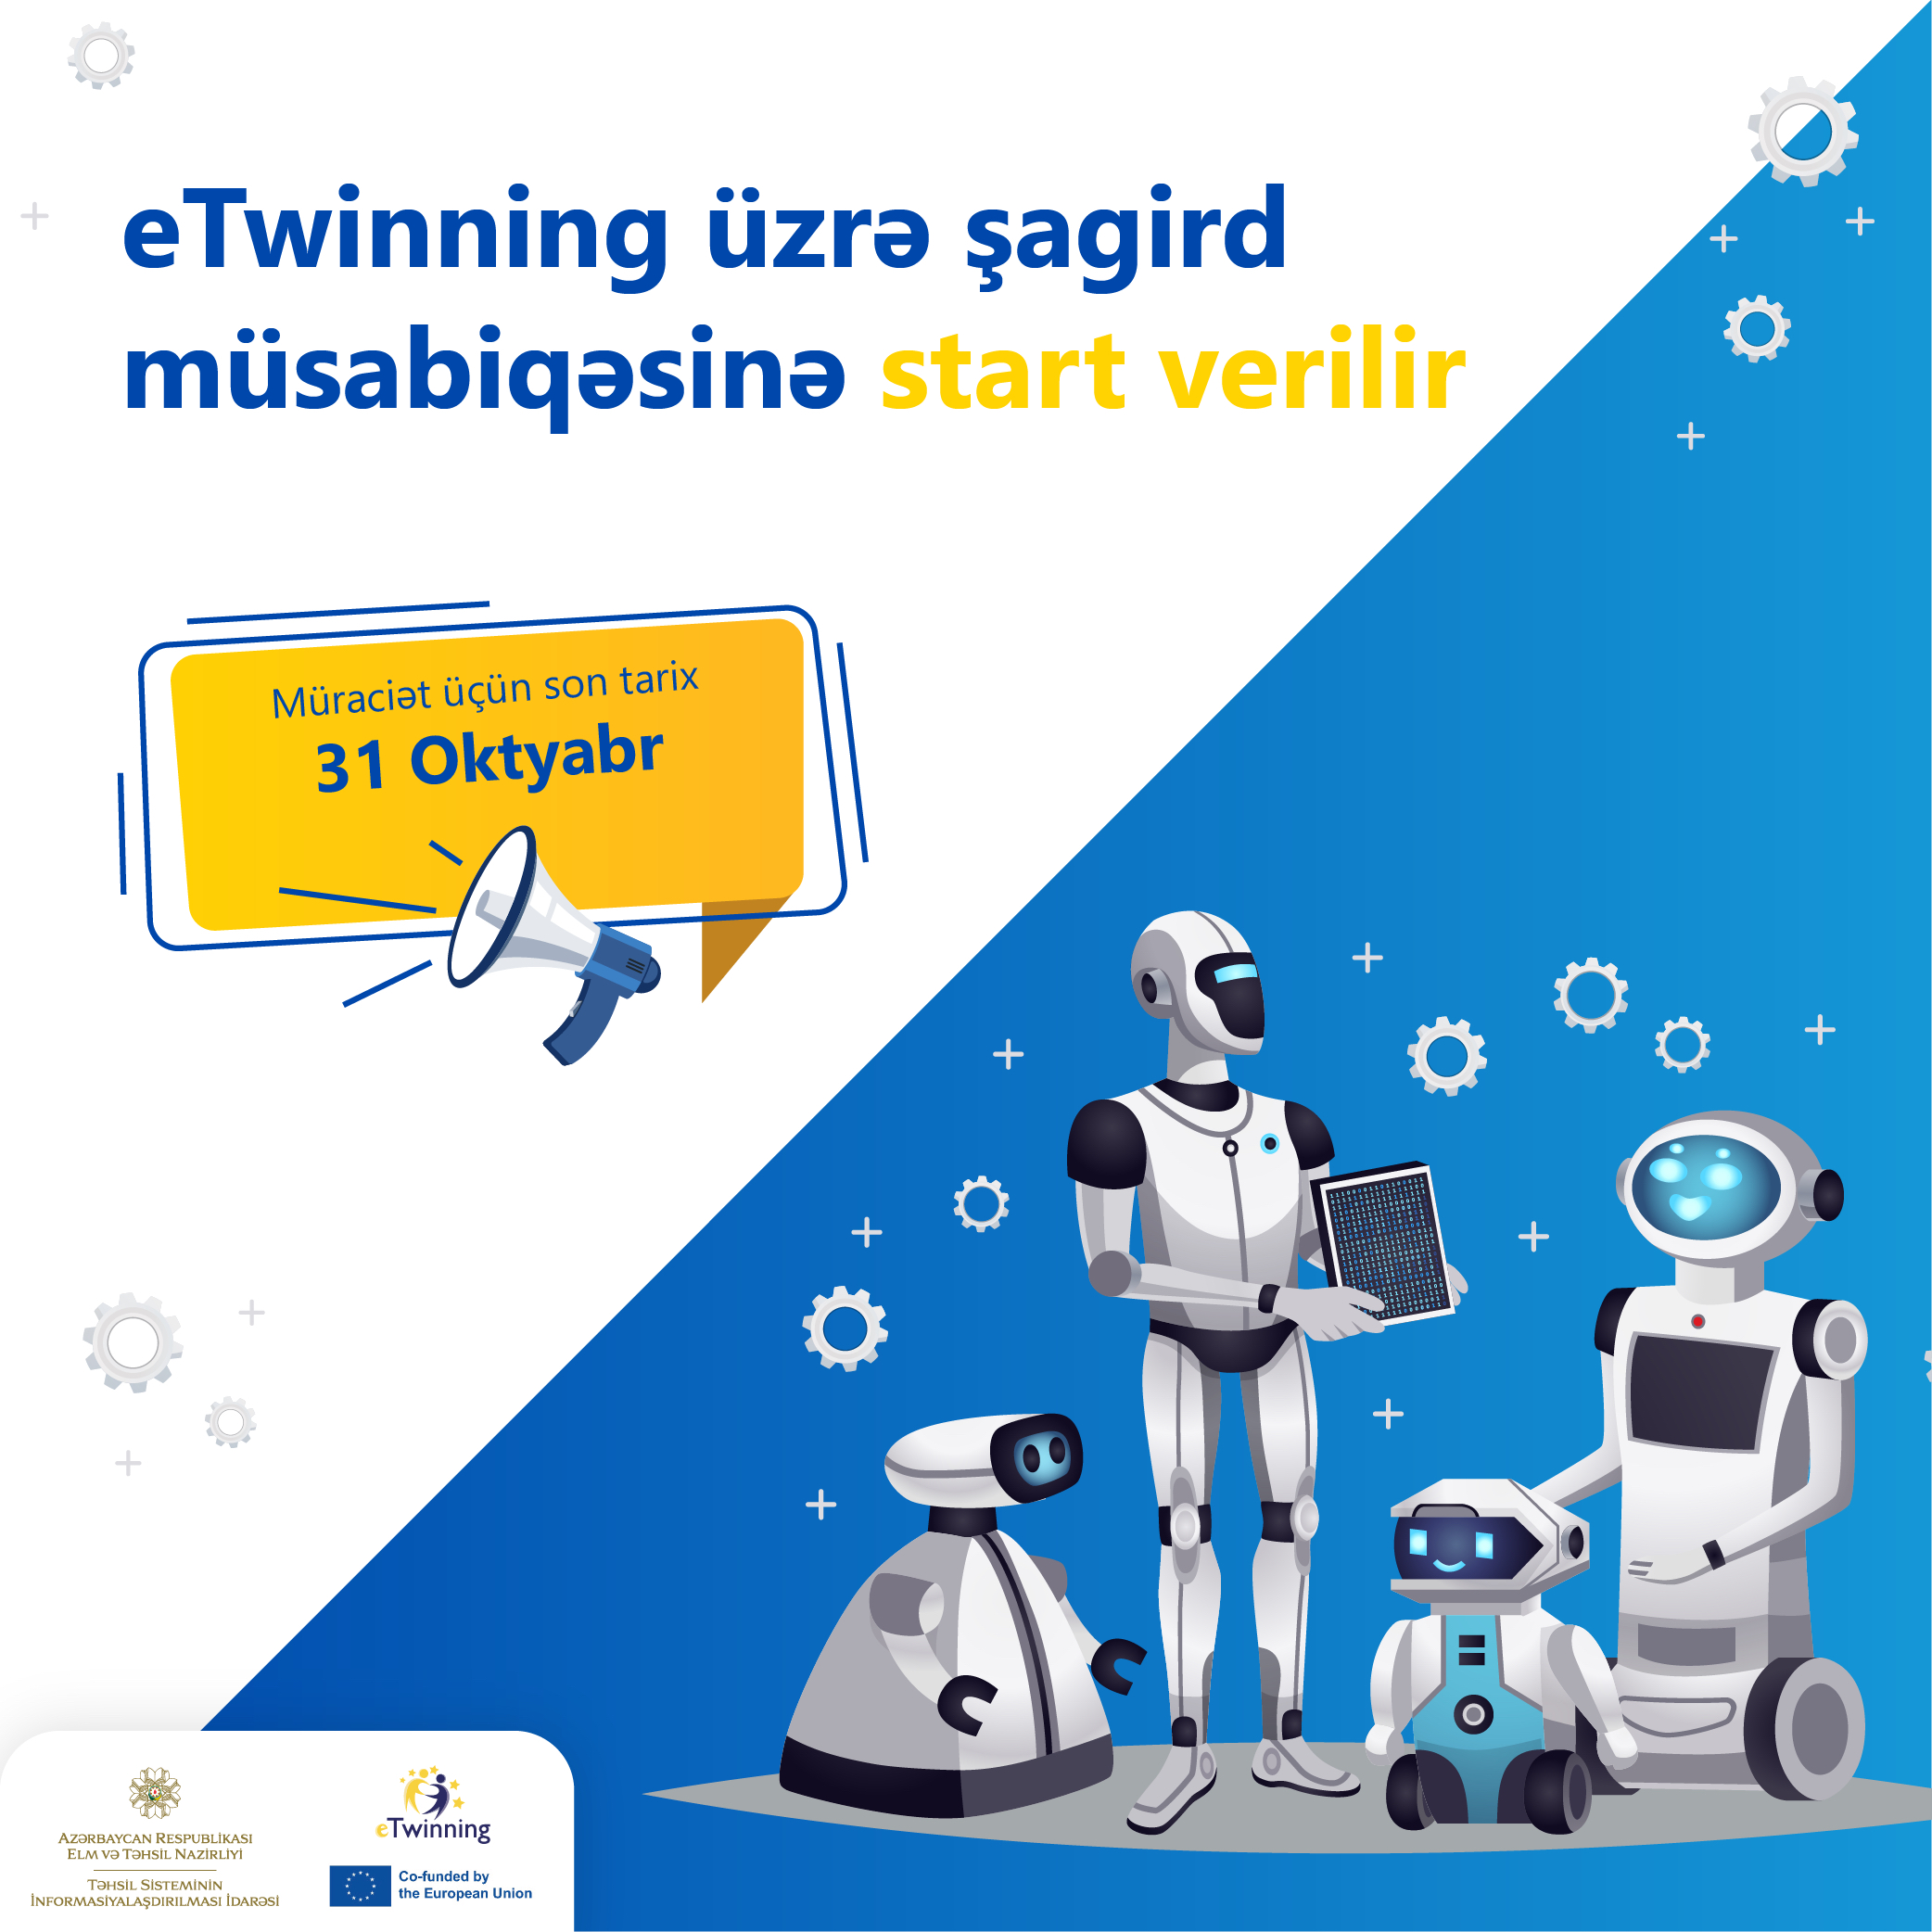 "eTwinning Azerbaijan" announces a competition for students